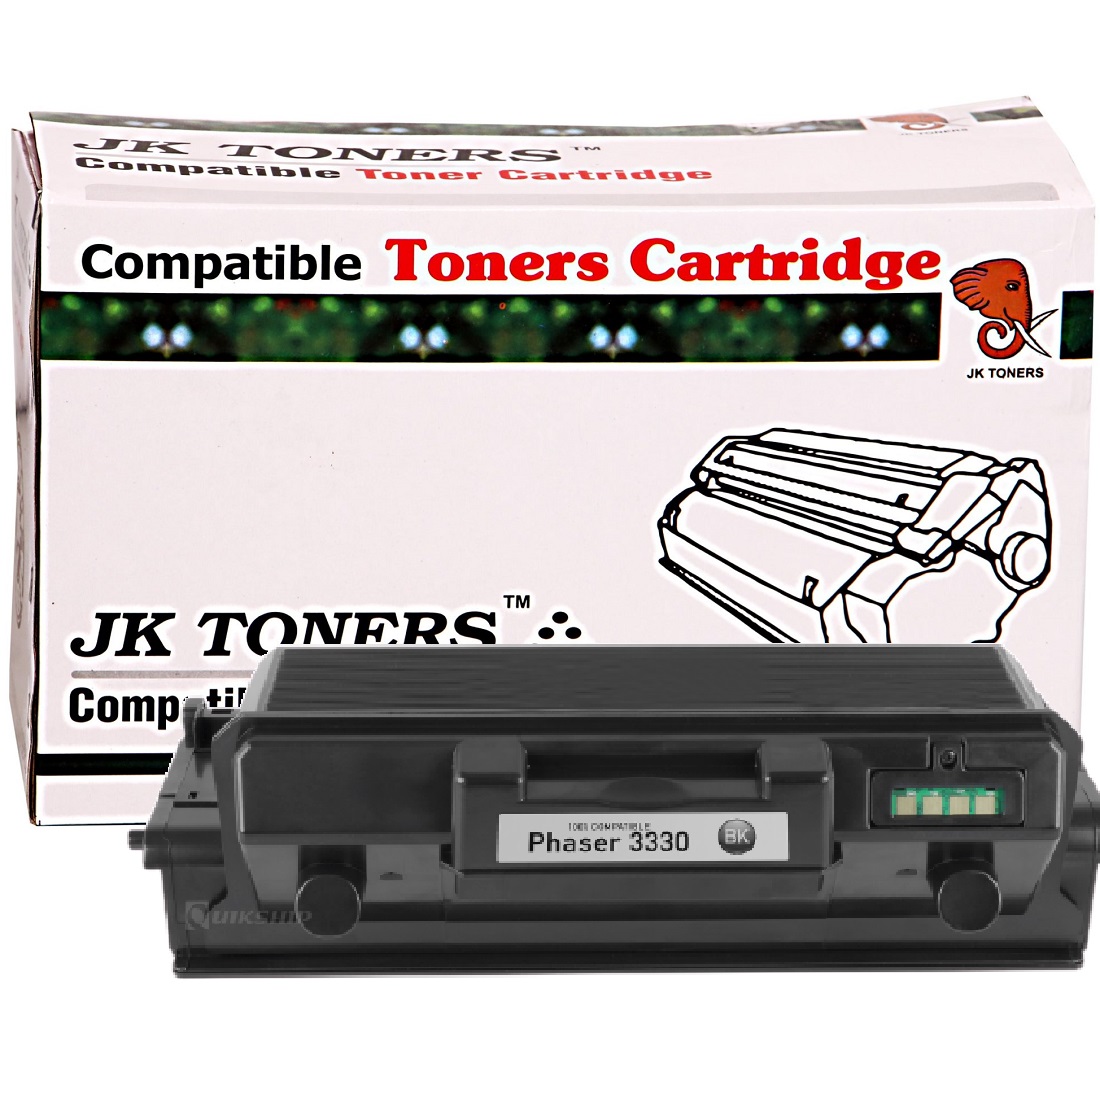 Jk 3335 Cartridge Compatible With Xerox 3330, WorkCentre 3335 / 3345 Printer